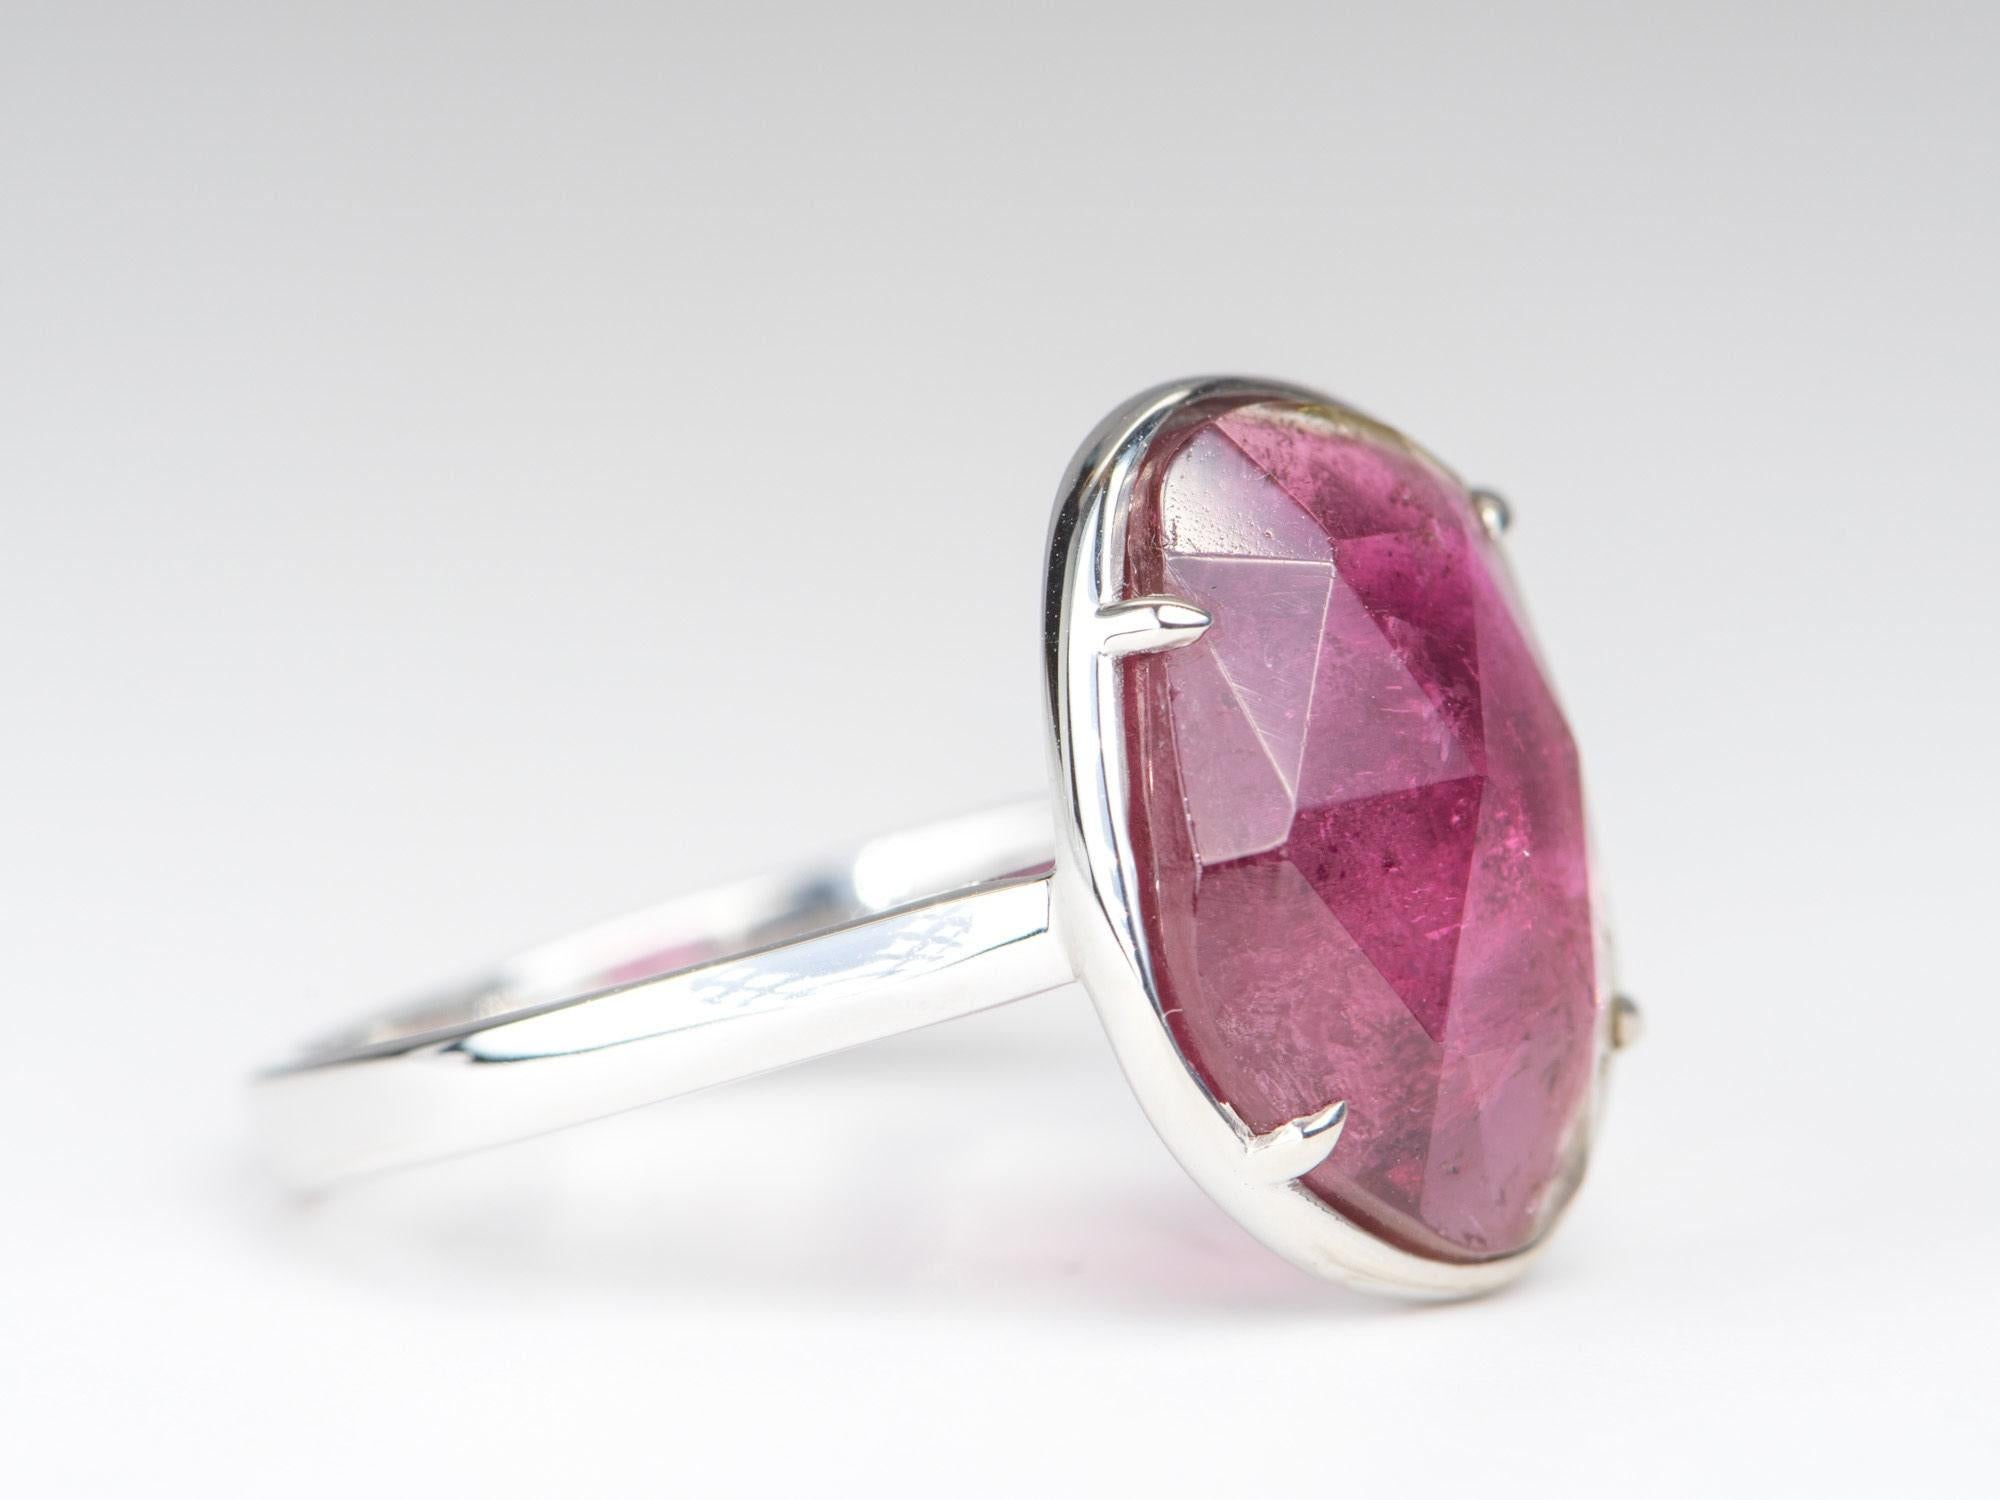 ♥ 5.42ct Bi-Color Watermelon Tourmaline Stacking Ring 14K White Gold
♥ Solid 14k white gold ring set with a beautiful freeform-shaped tourmaline
♥ Gorgeous bi-color color!
♥ The item measures 15.7 mm in length, 12.01 mm in width, and stands 6.9 mm